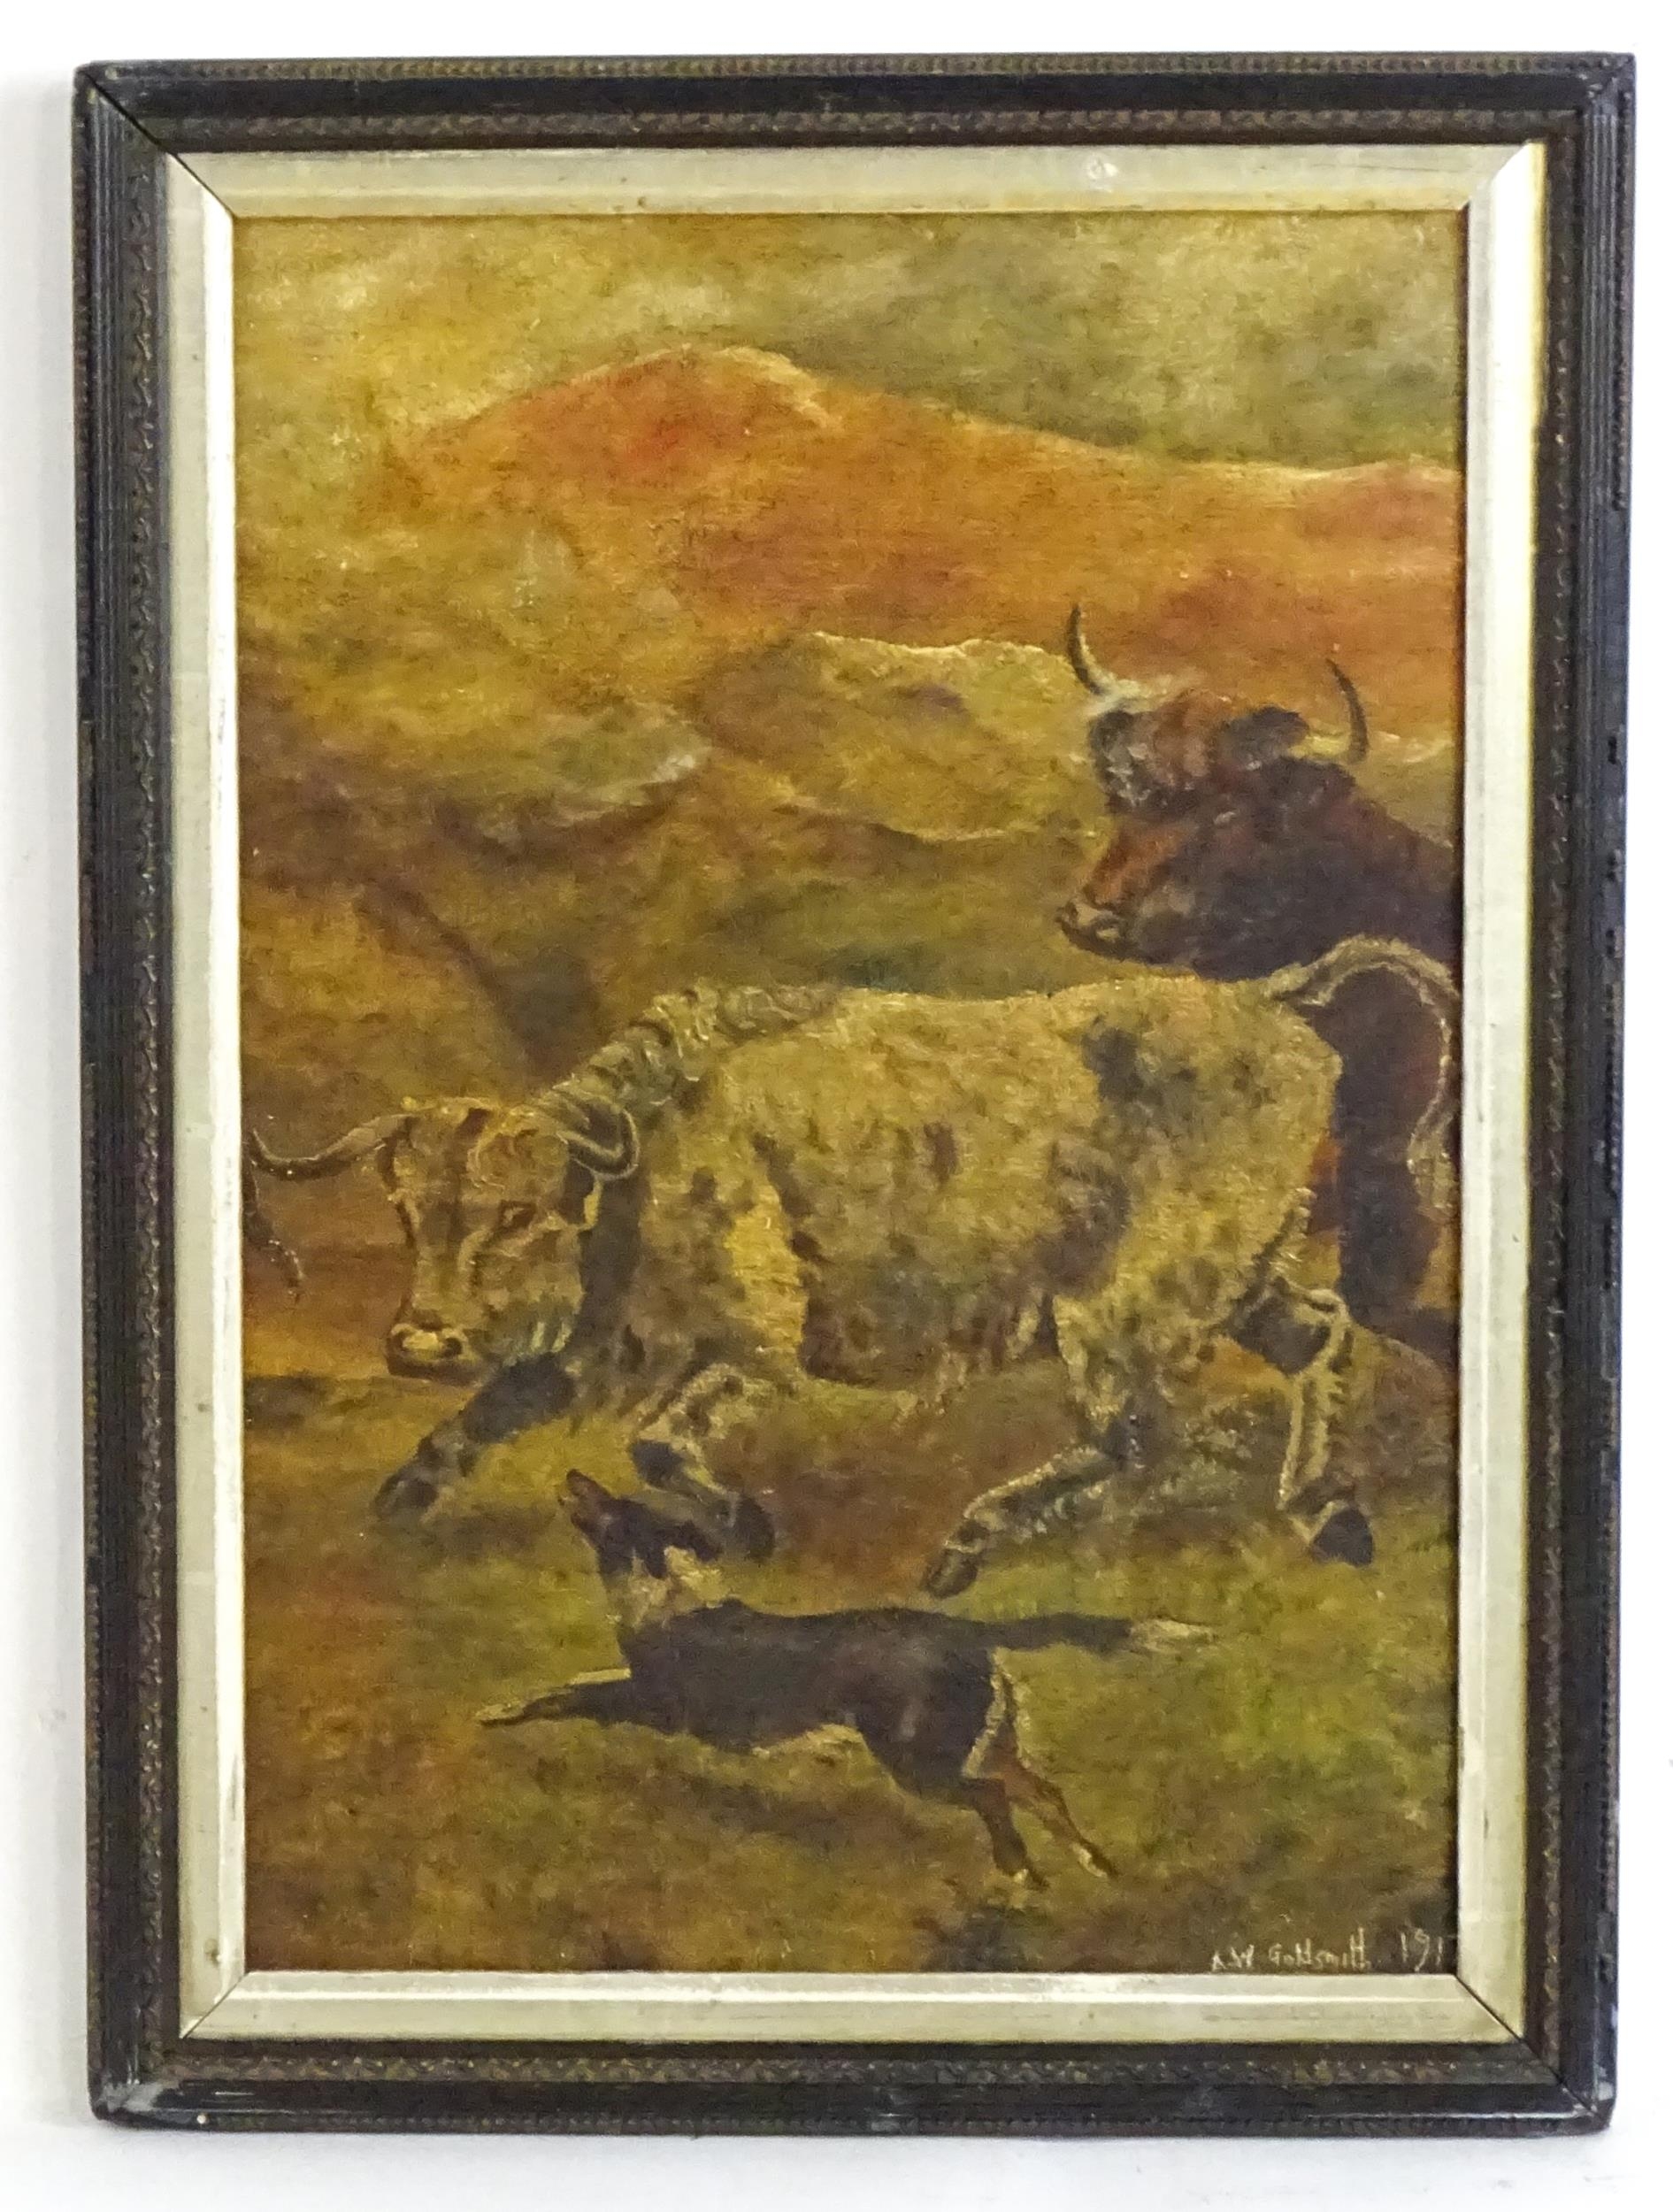 A. W. Goldsmith, Early 20th century, Oil on canvas laid on board, A landscape scene with cattle